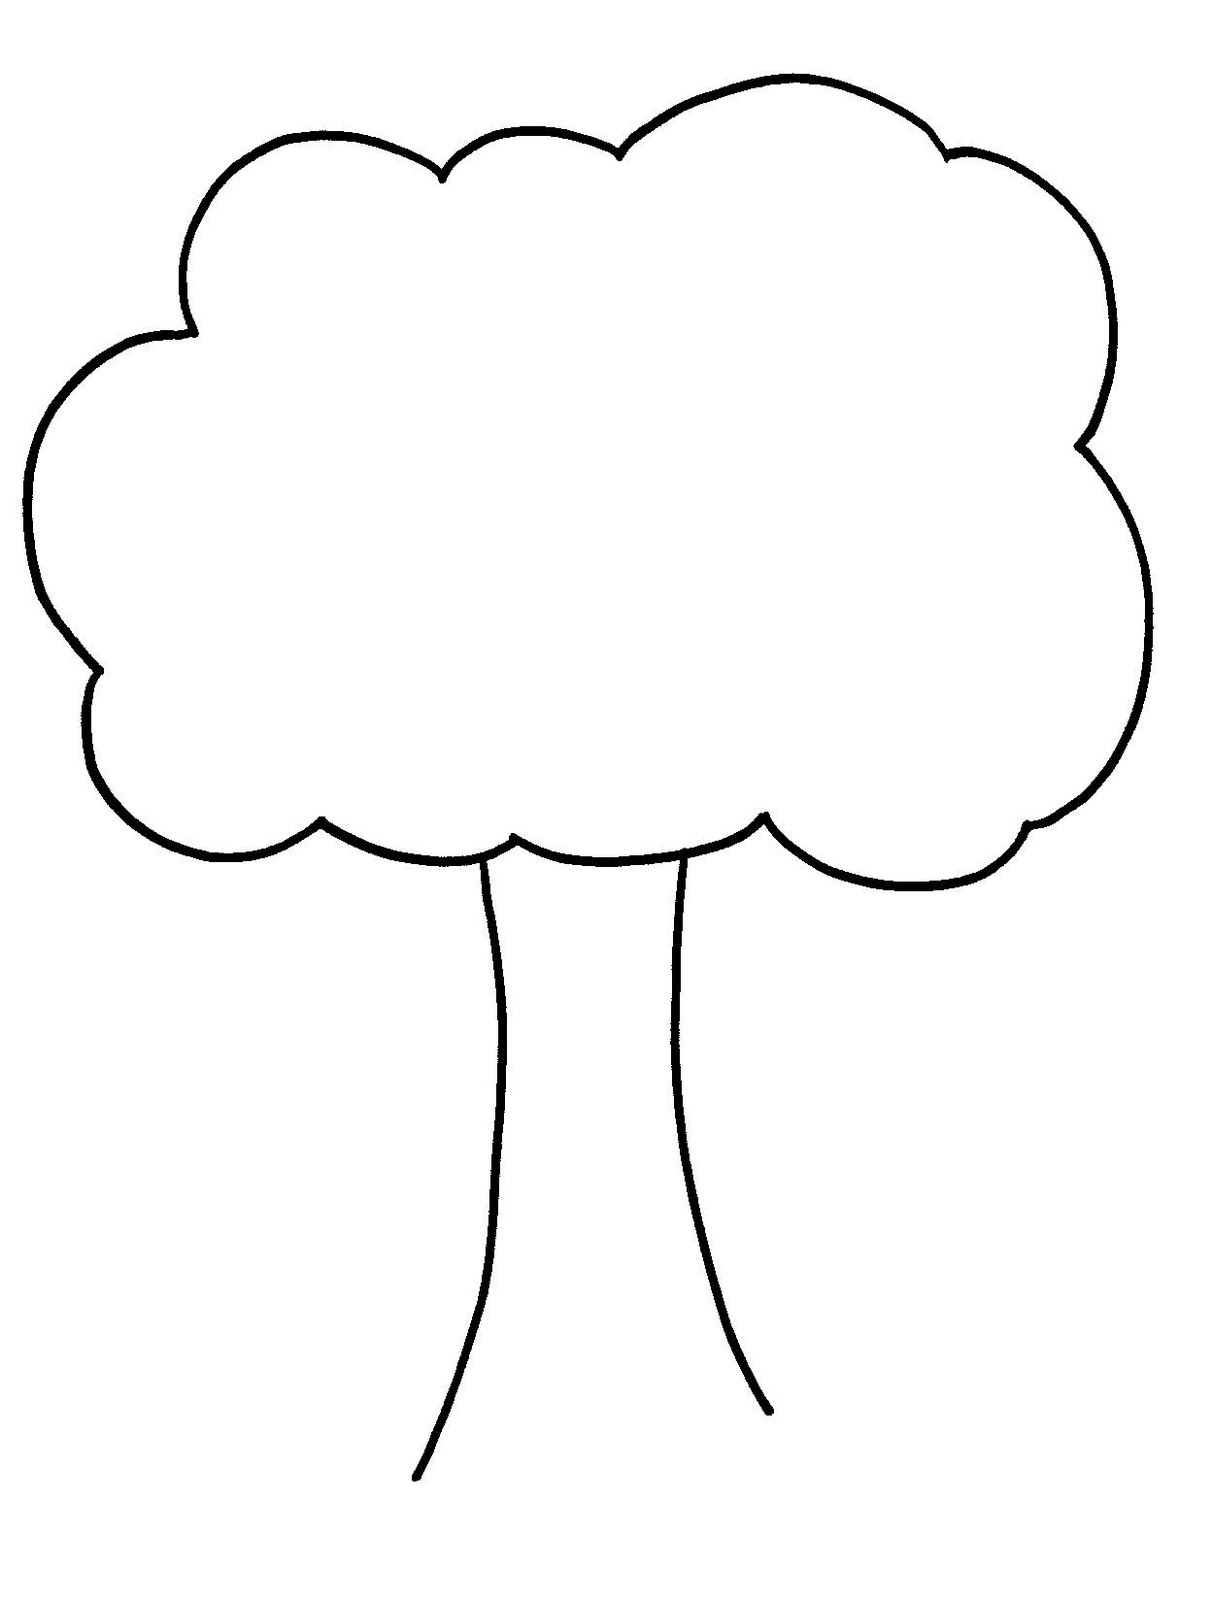 Outline Of A Tree - ClipArt Best